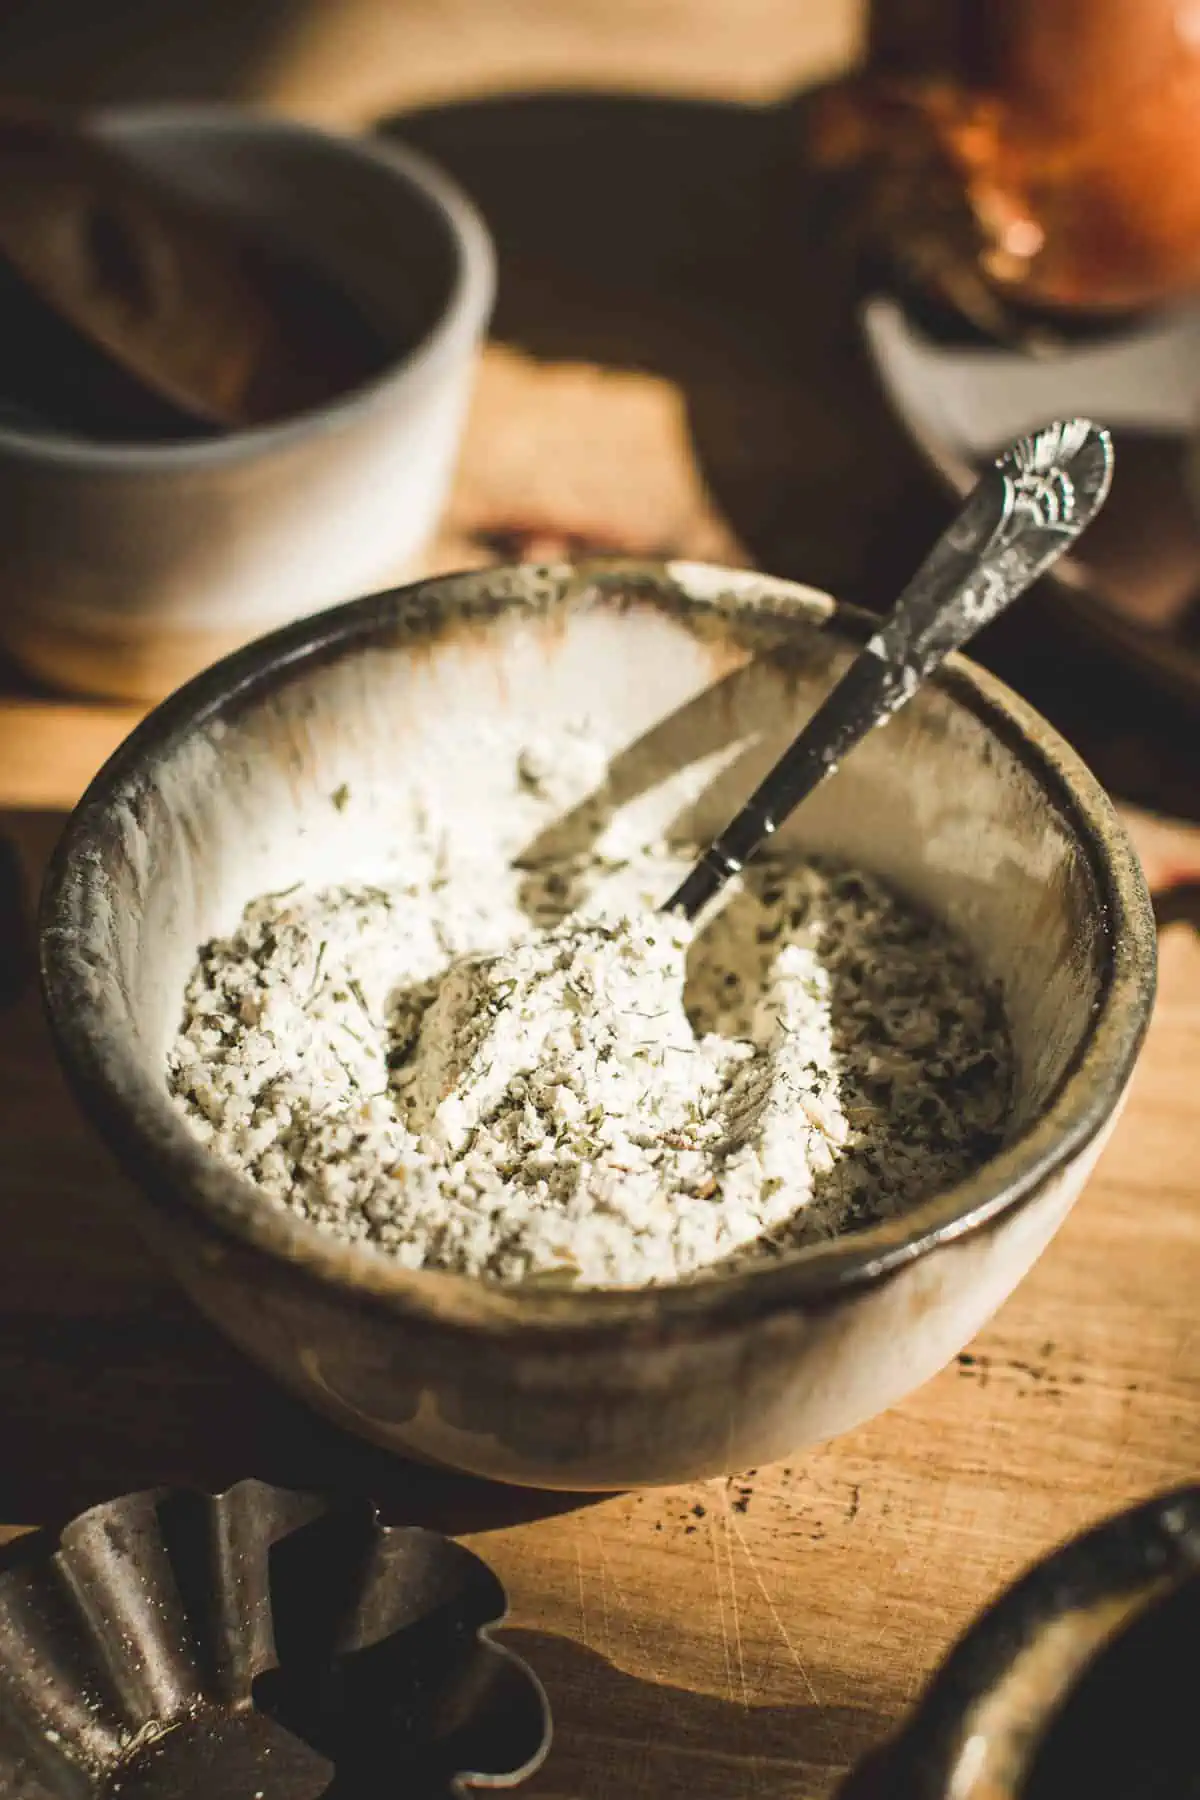 Ranch seasoning mix in a bowl with a spoon.